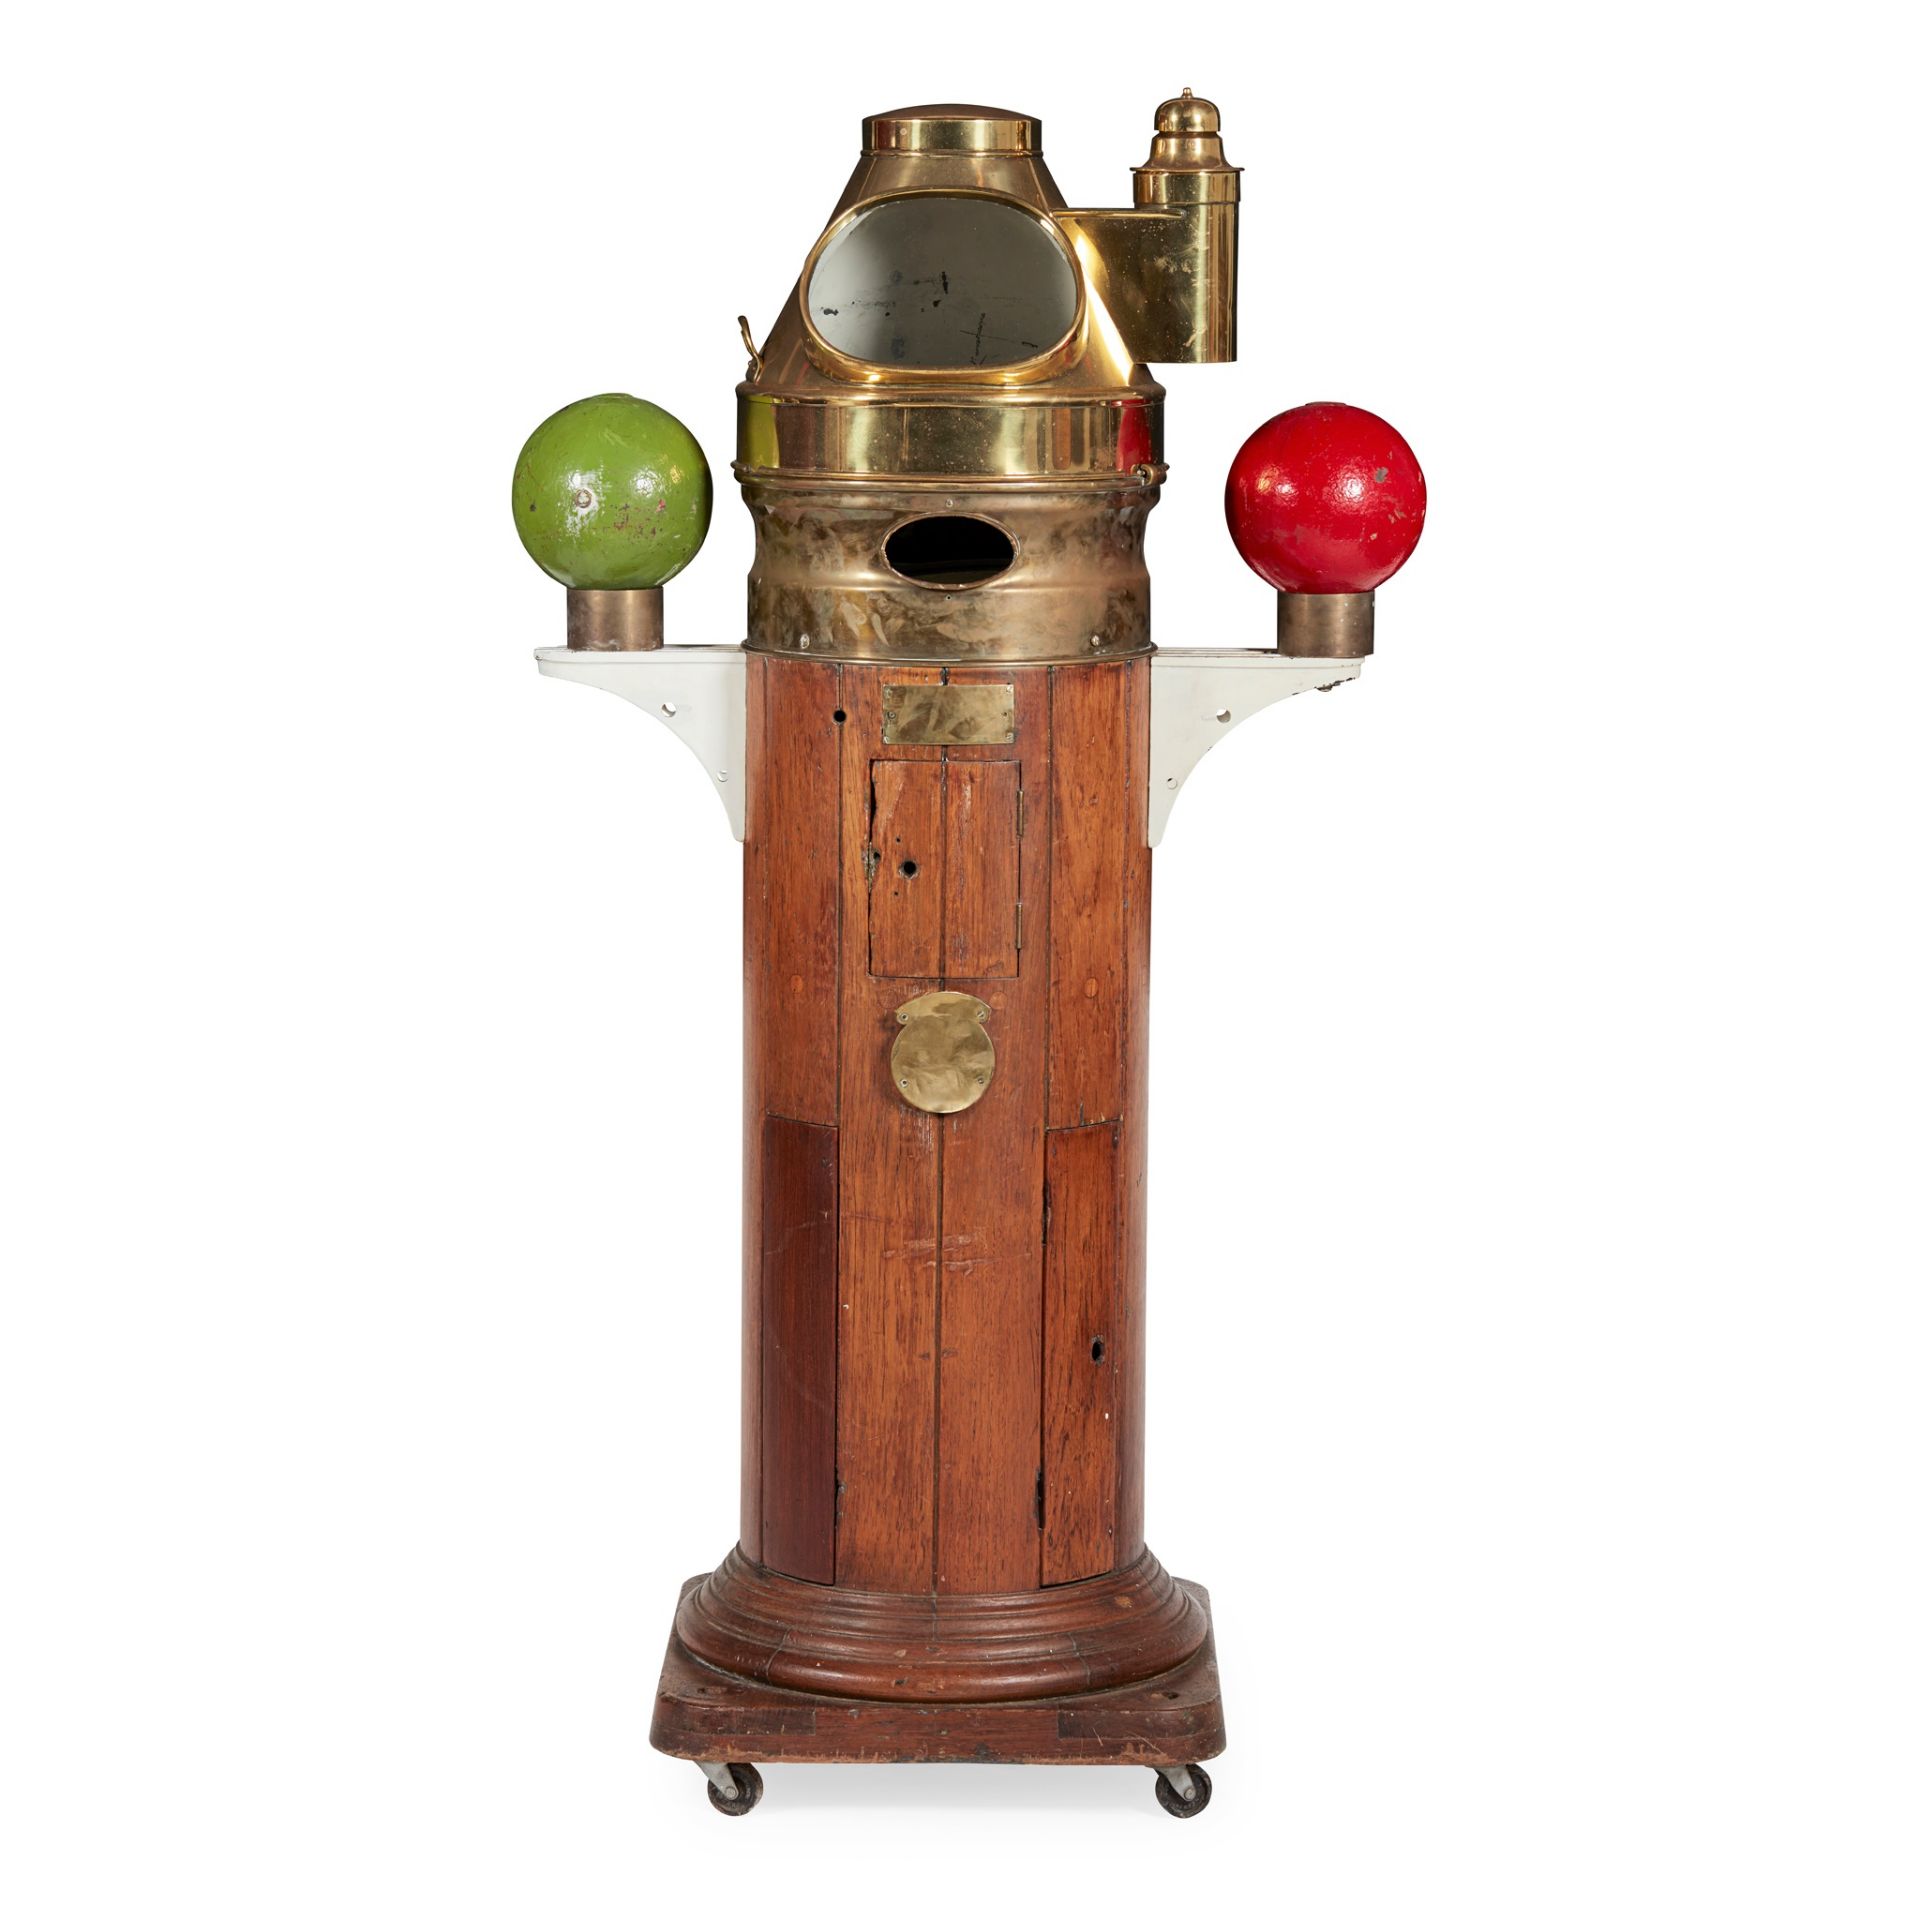 BRASS, IRON AND TEAK BINNACLE, FROM THE SS GOTHLAND LATE 19TH CENTURY